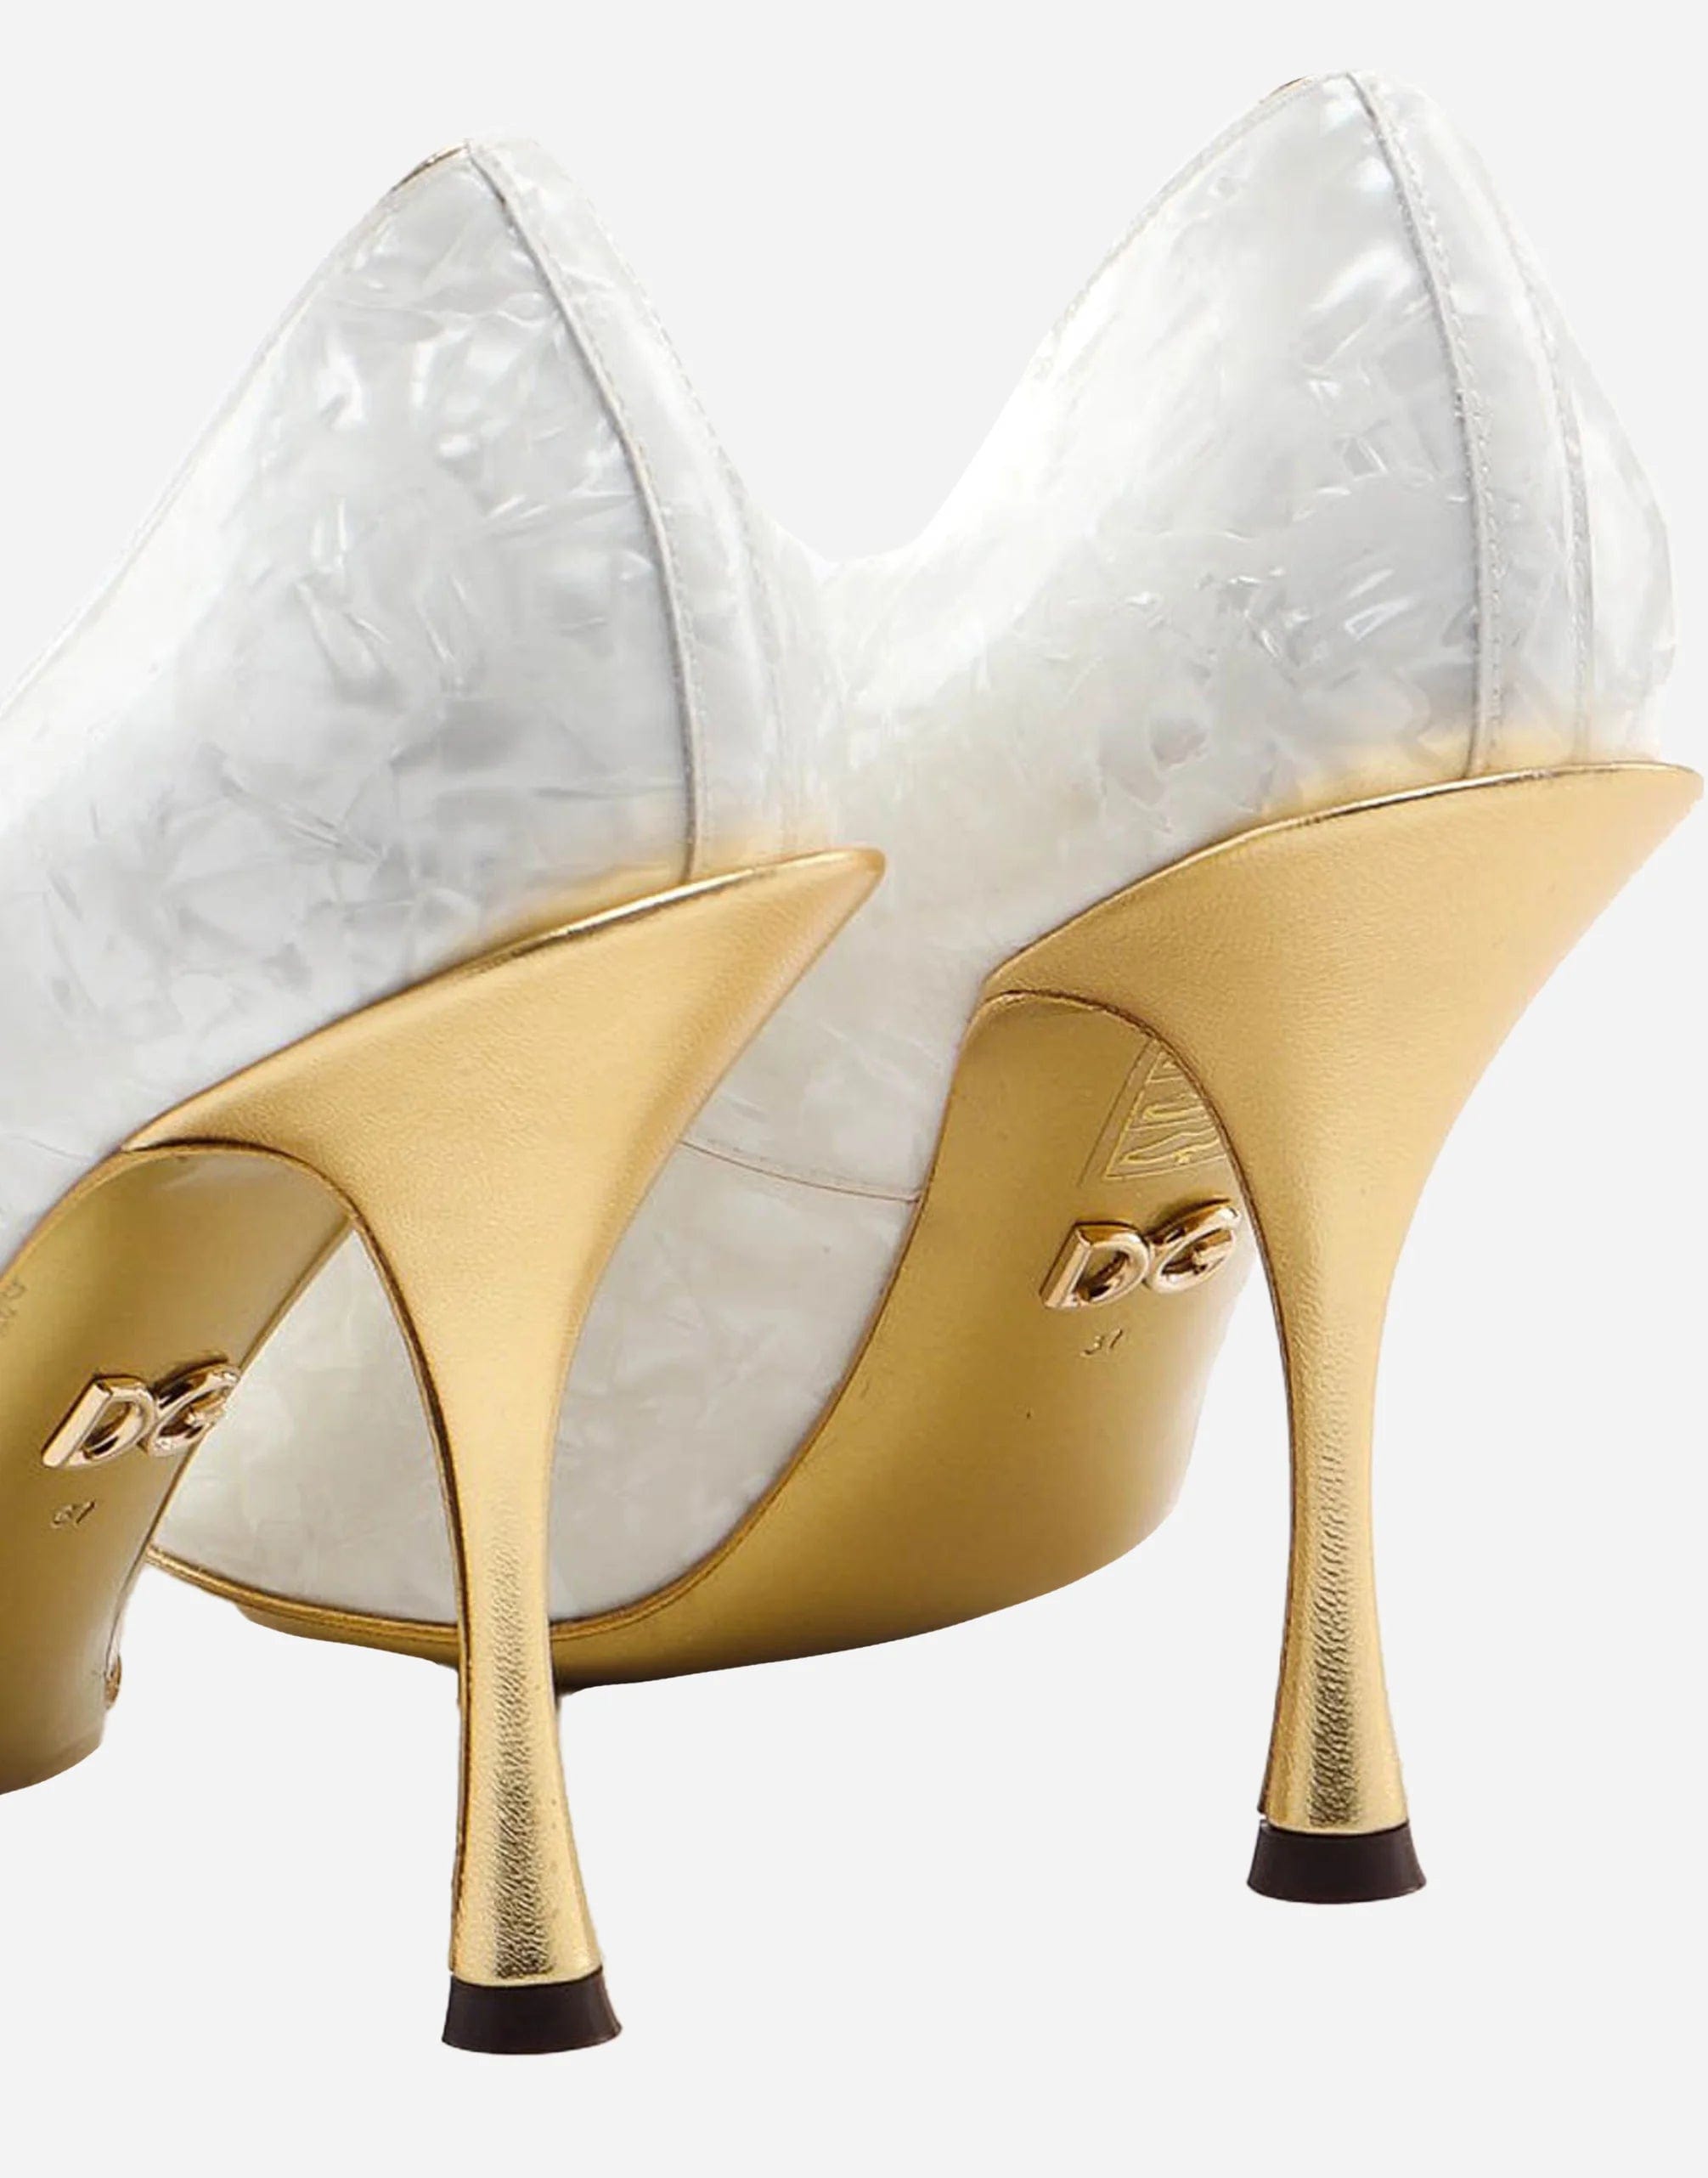 Dolce & Gabbana Mary Jane Crystal Pearl Bow Pumps